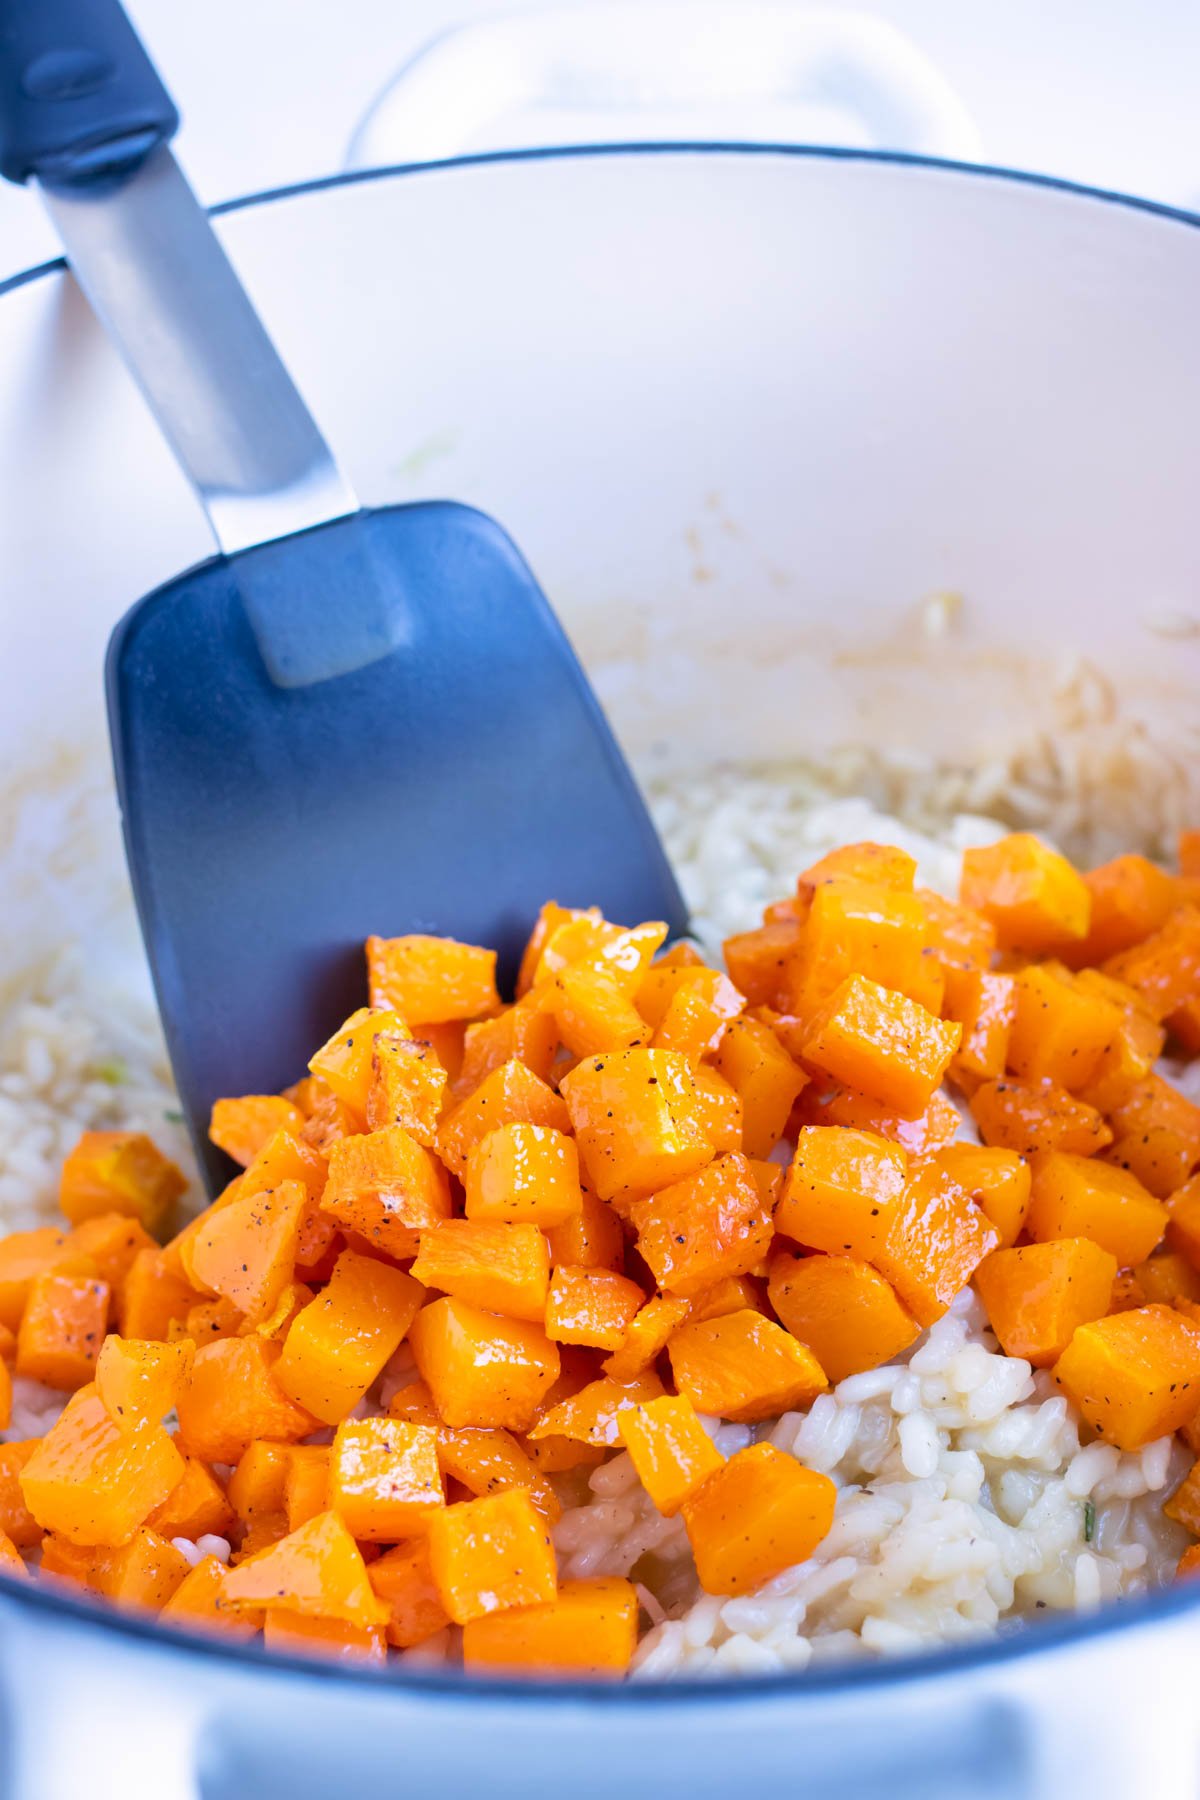 Roasted butternut squash is added to the rice, herb, and parmesan mixture.